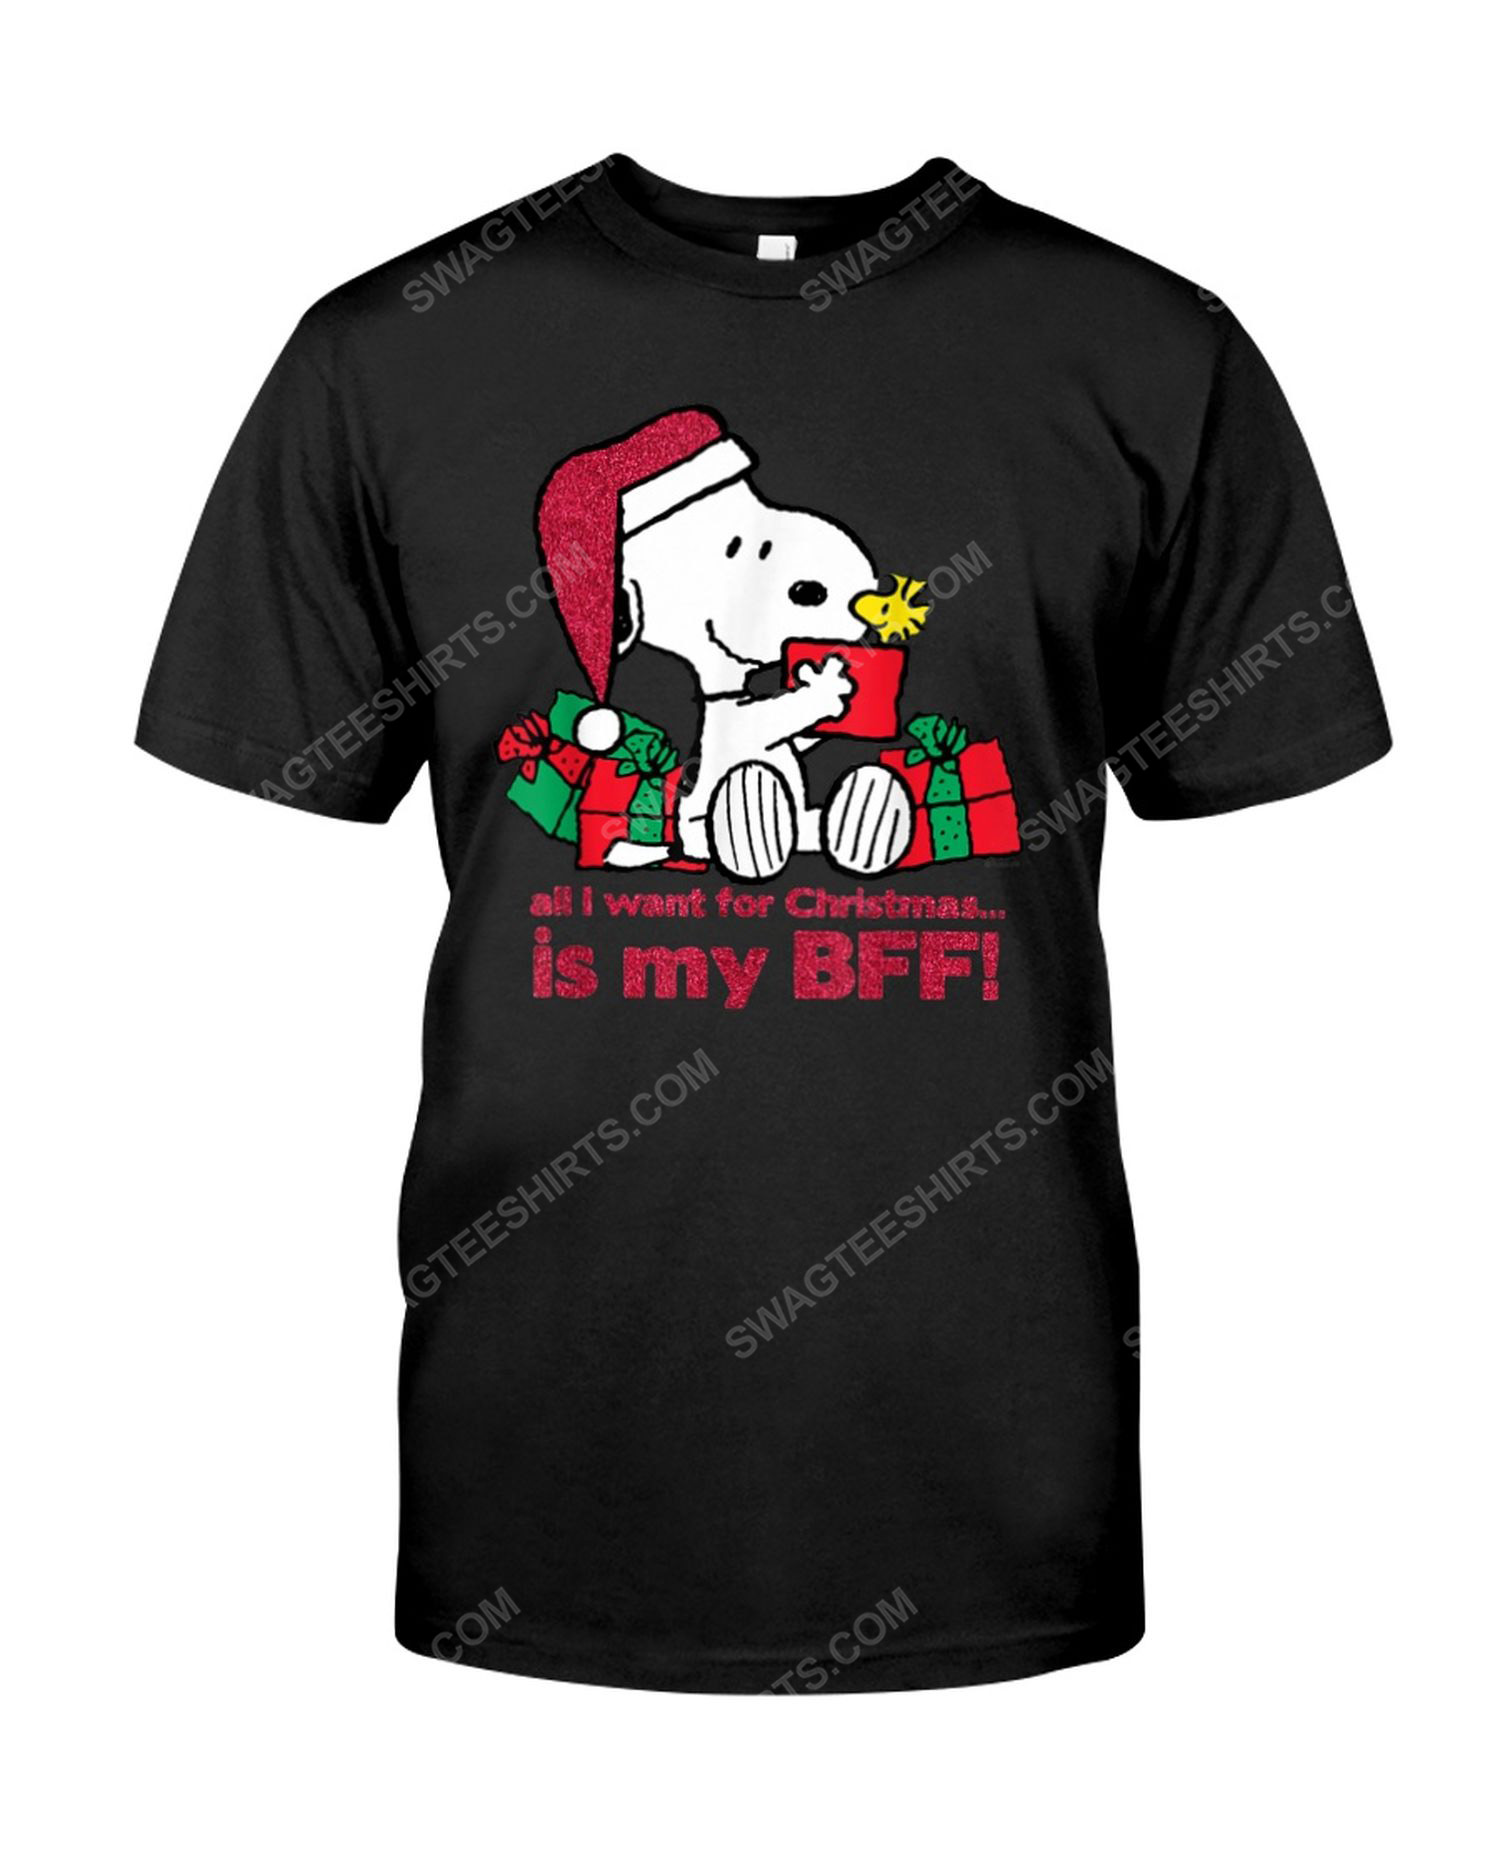 Snoopy all i want for christmas is my bff tshirt